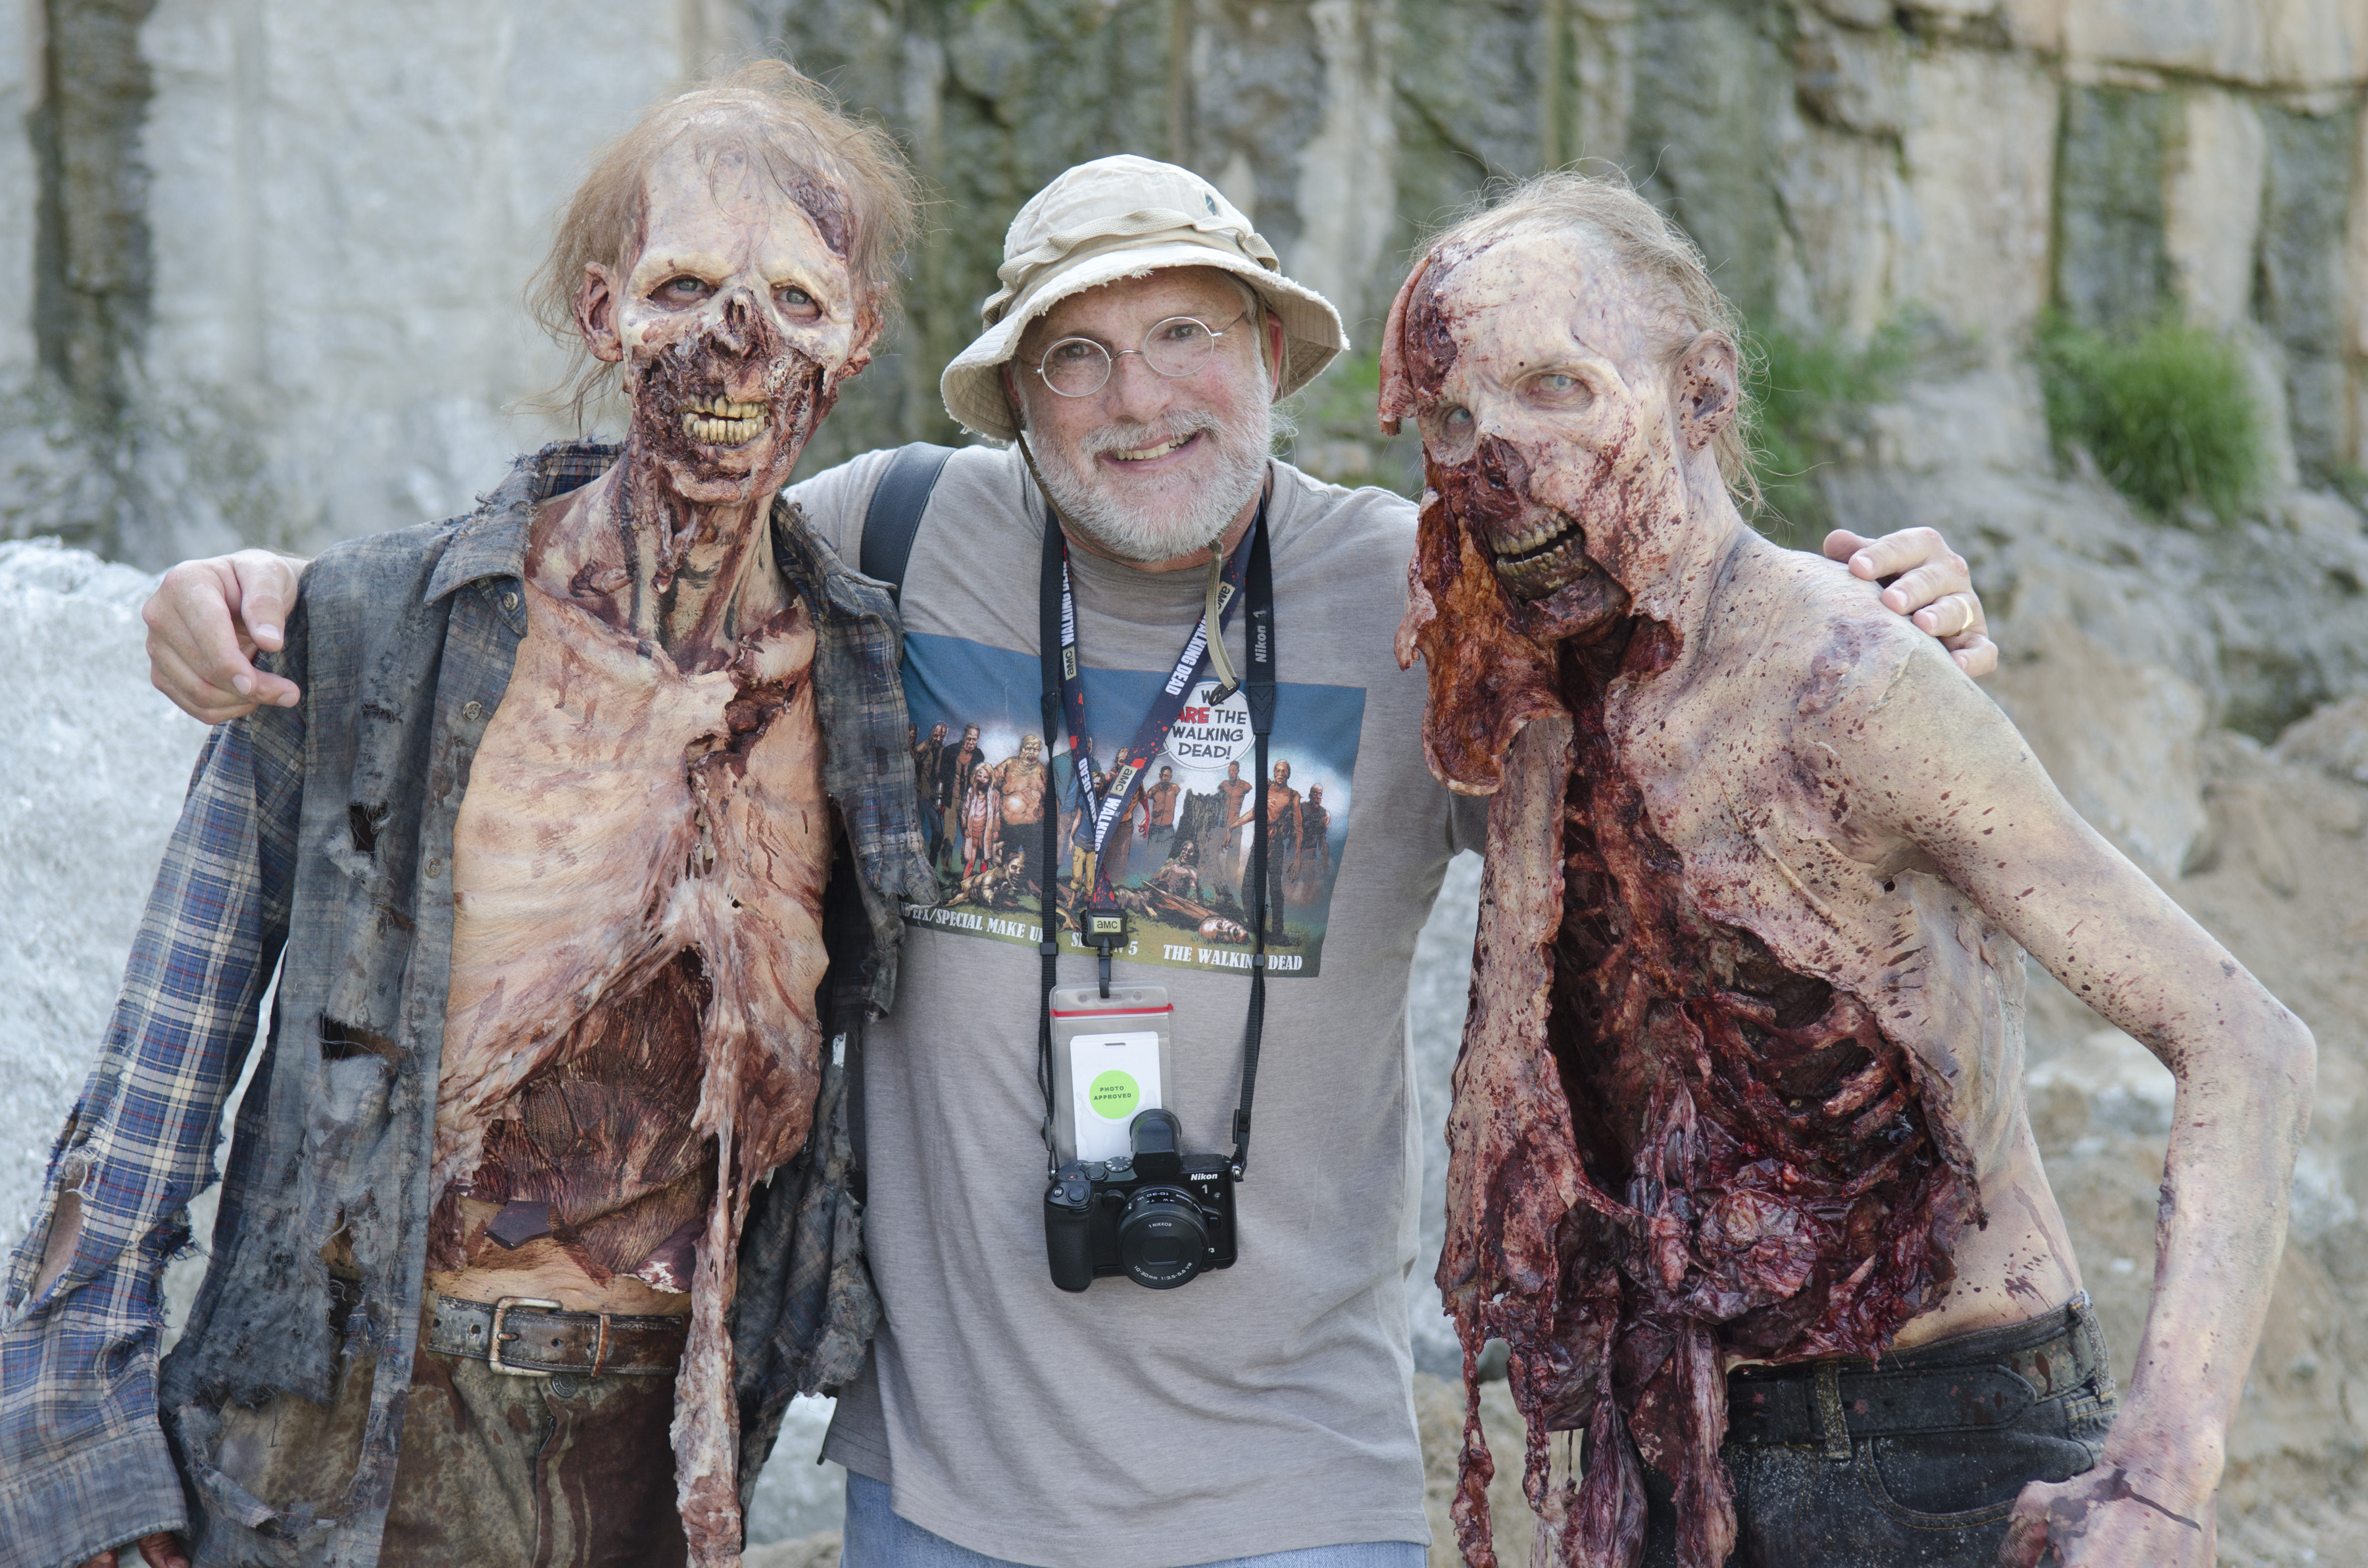 How I went from filming Gators to shooting zombies on set of “The Walking Dead”